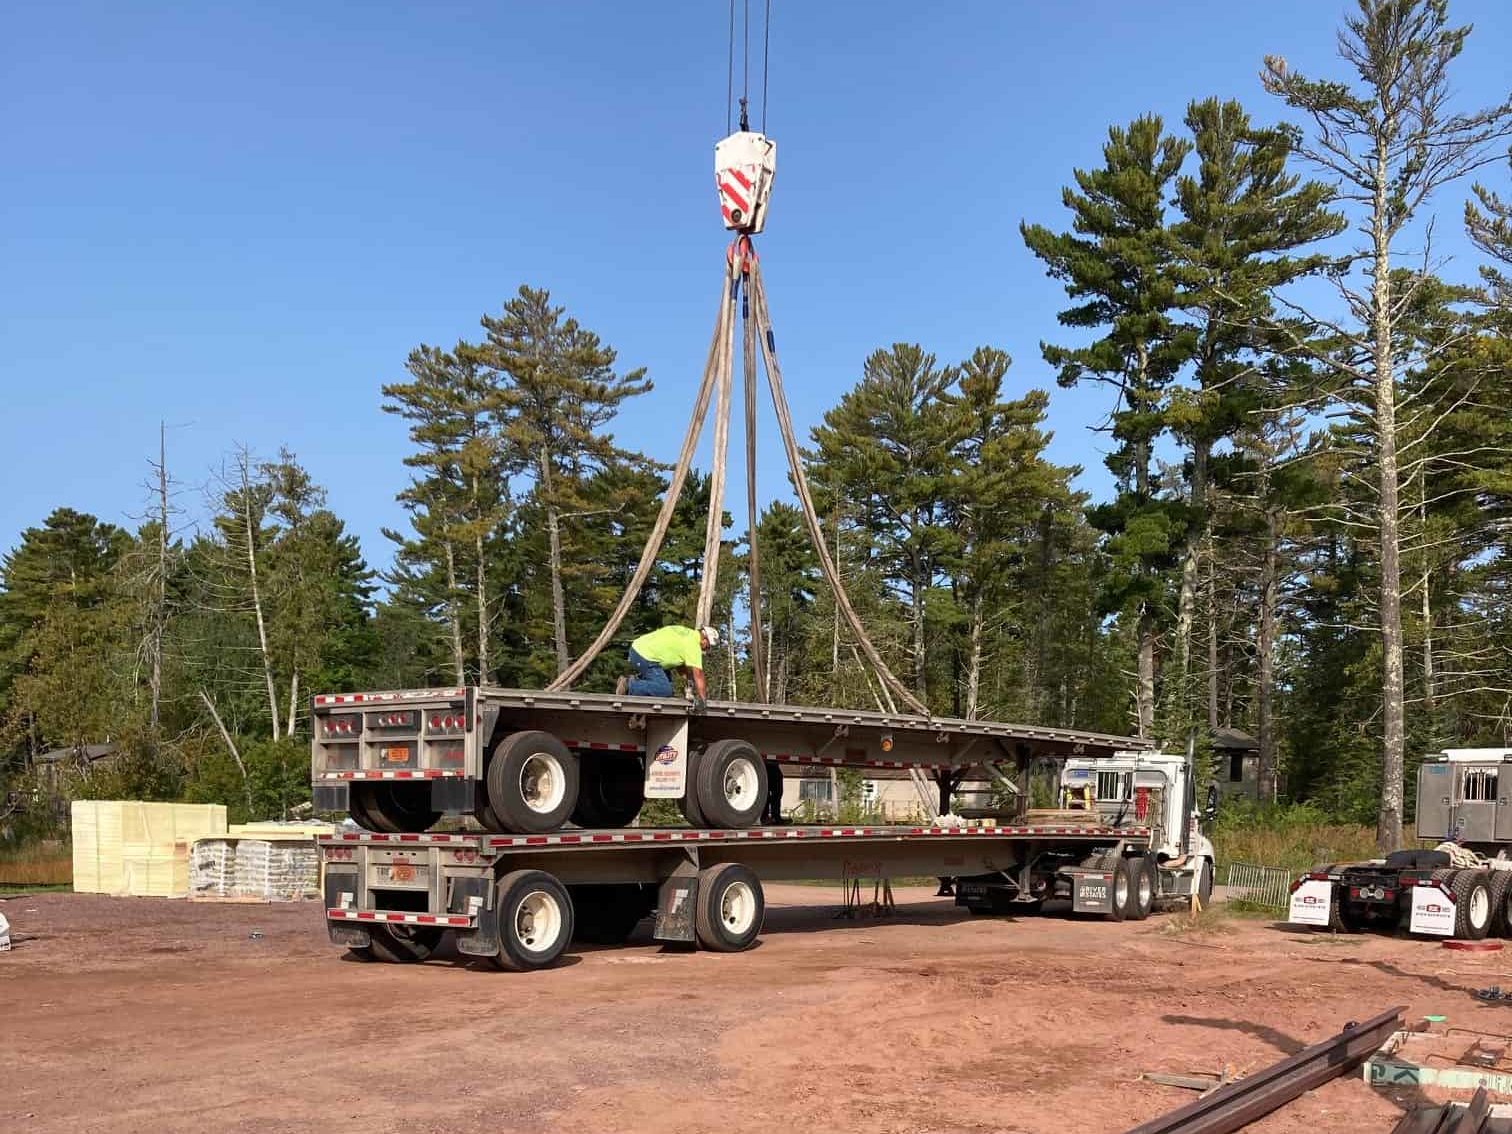 Madeline Island Fire Protection Water Tanks by Wieser Concrete